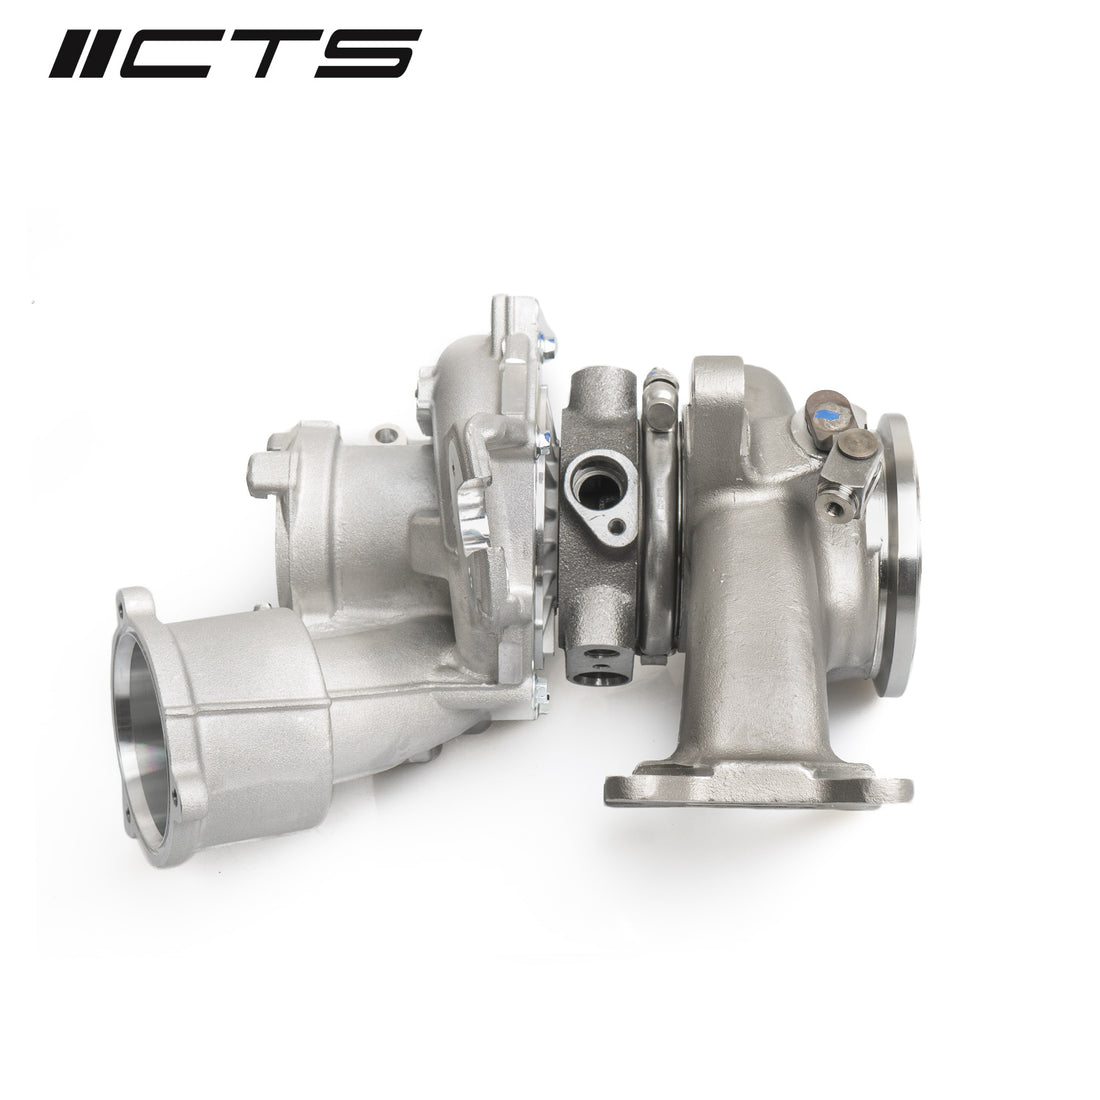 CTS Turbo IS38 Replacement Turbocharger for MQB Golf/GTI/Golf R; Audi A3/S3 (2015+) CTS Turbo TR-1000